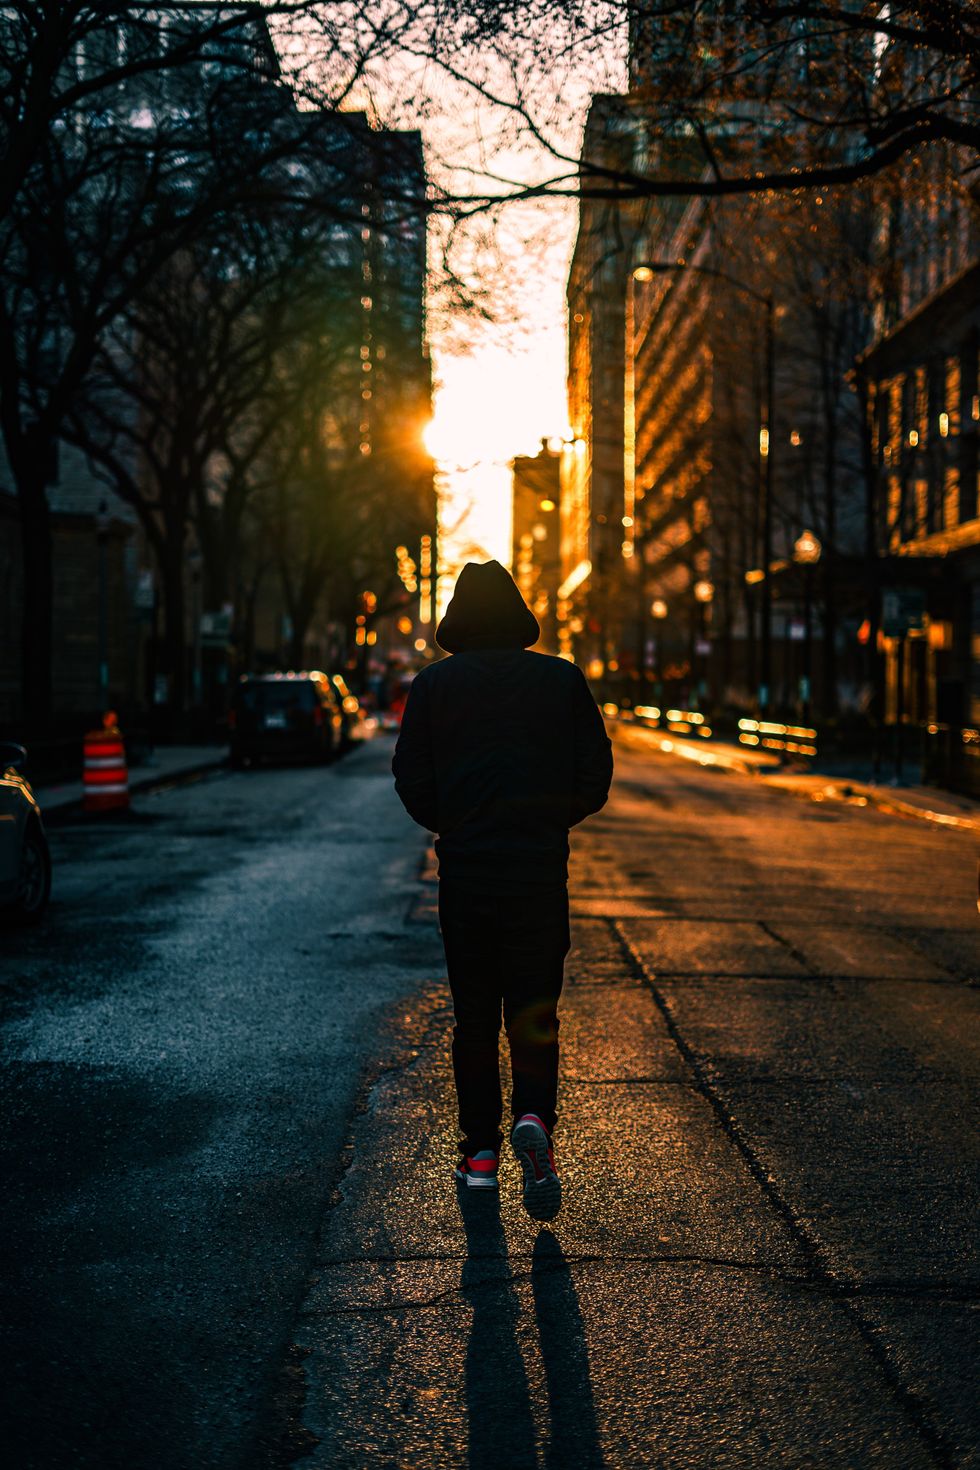 https://www.pexels.com/photo/photography-of-person-walking-on-road-1236701/